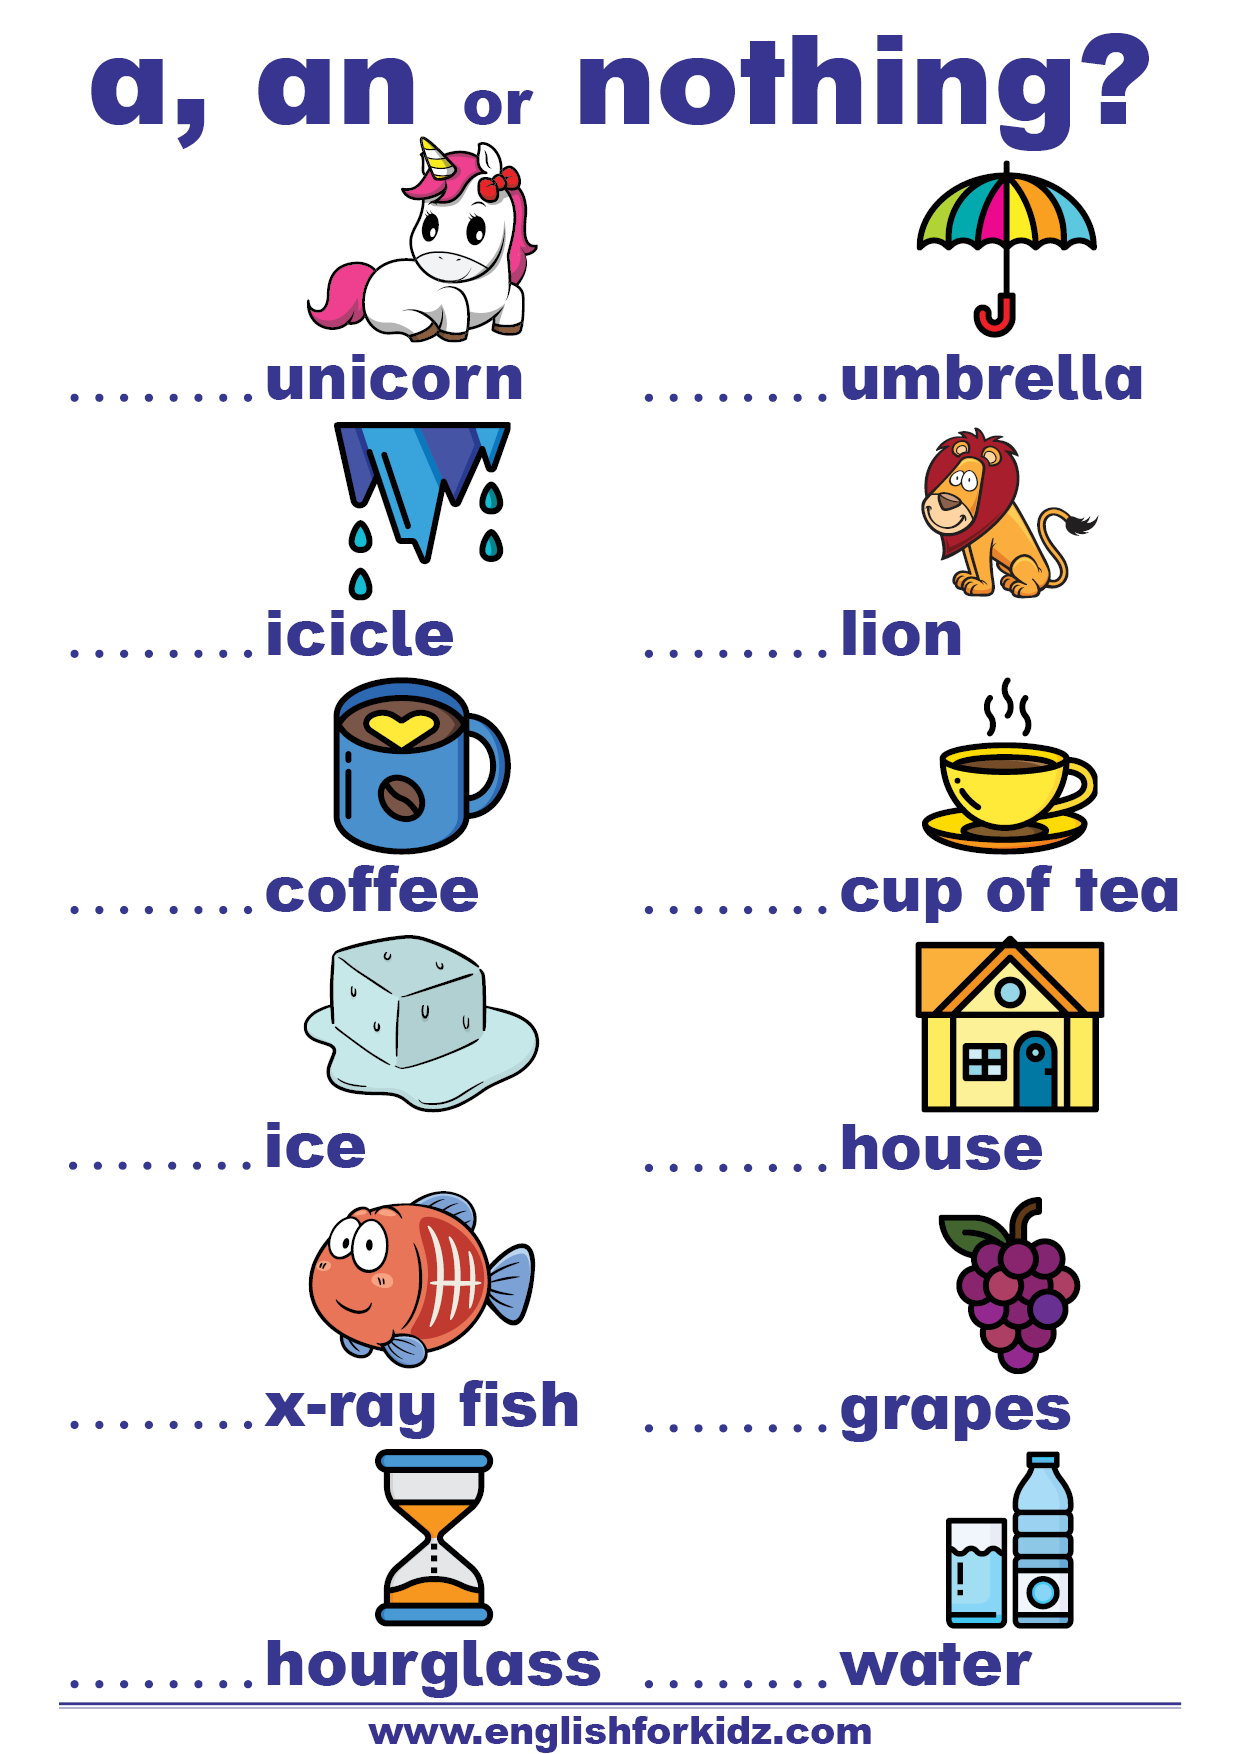 English For Kids Step By Step: Indefinite Articles Worksheets: A Or An?